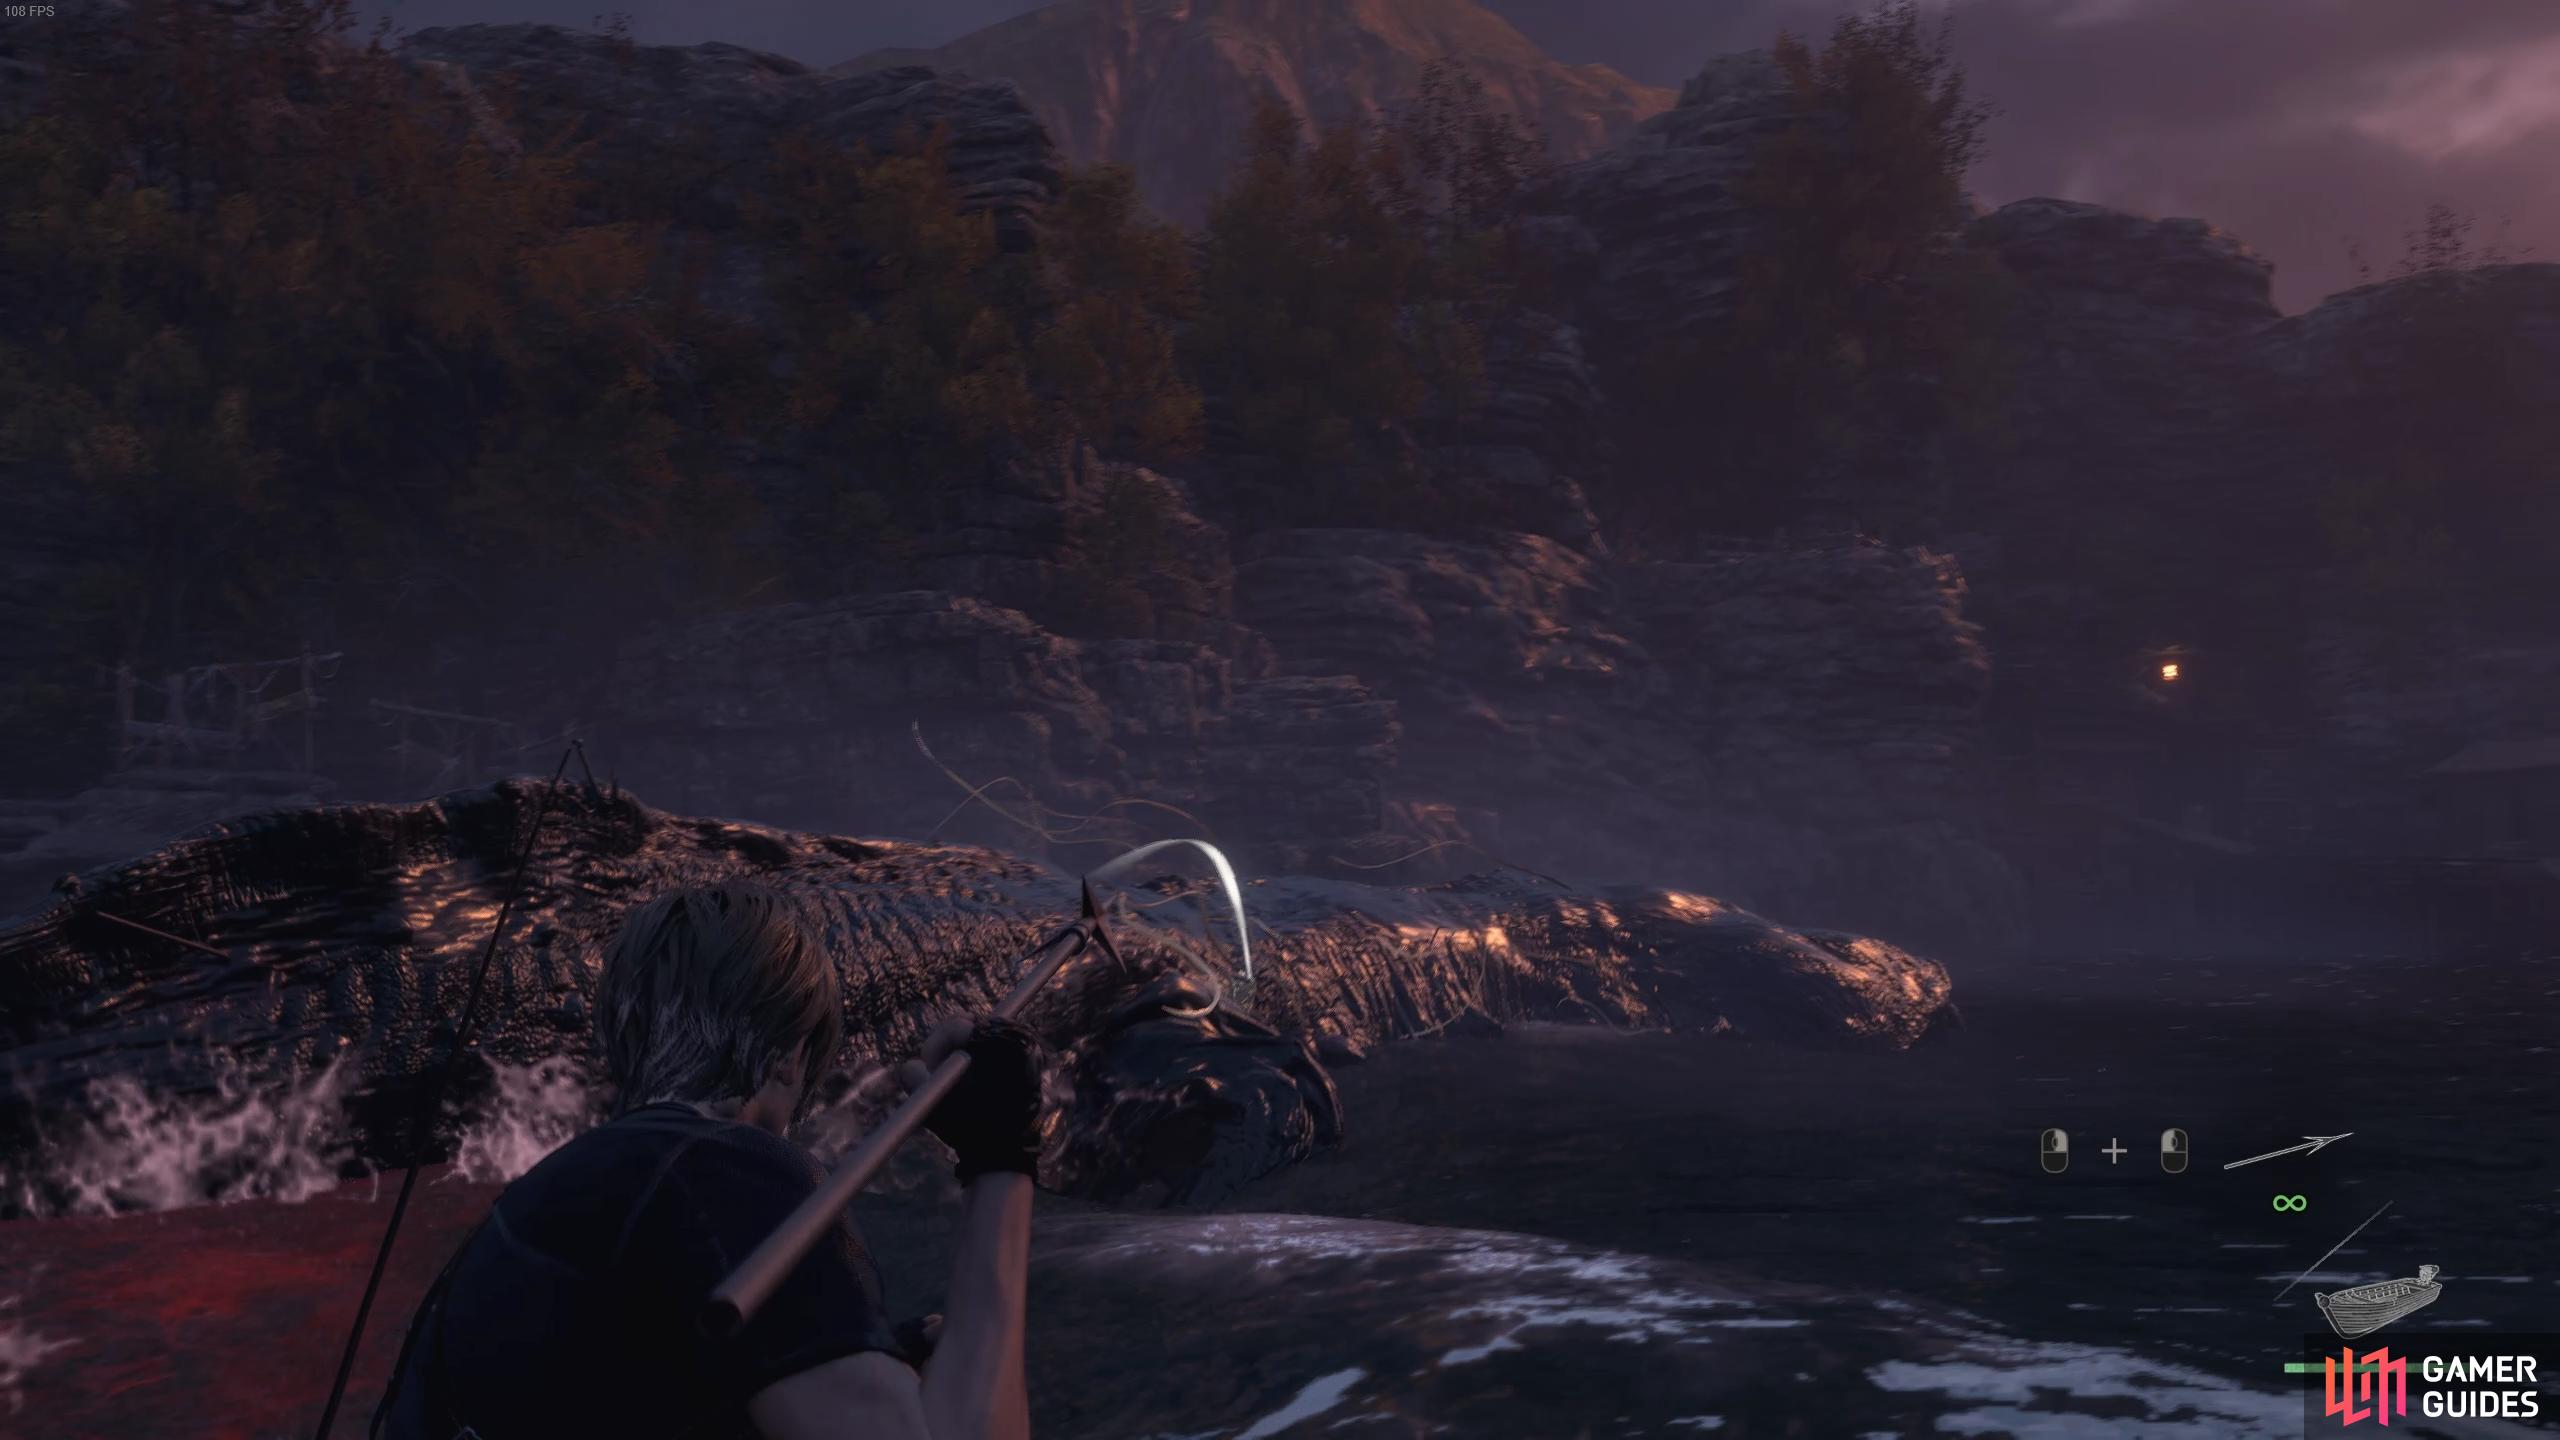 You need to aim carefully to hit the lake monster with every harpoon shot.